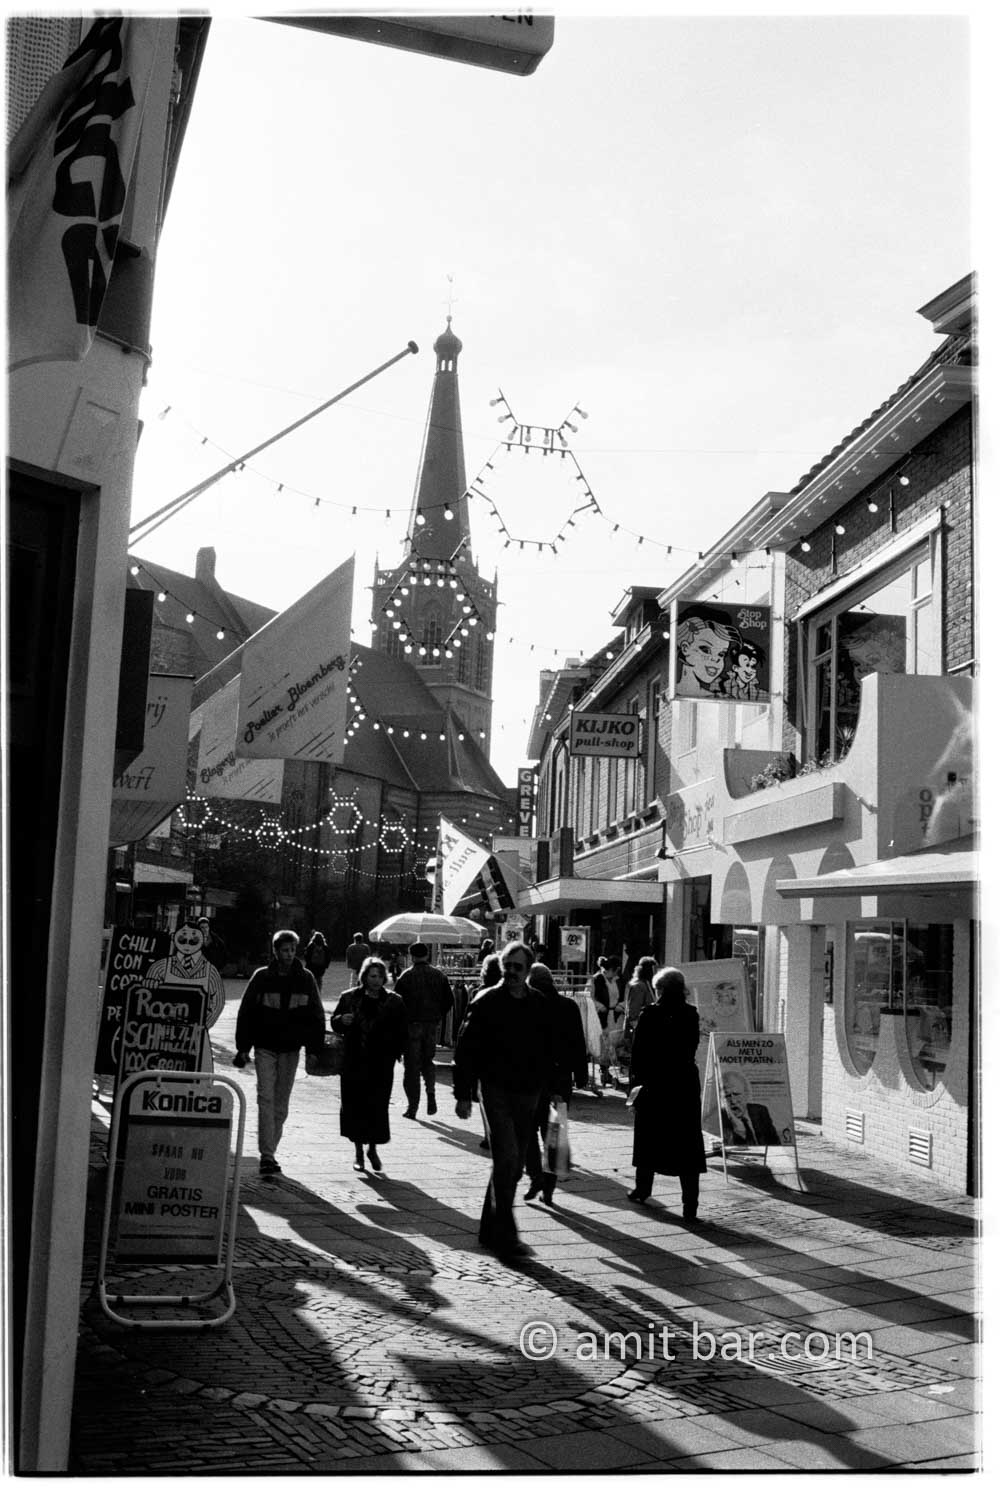 Lights and shadows: A group of people is walking on street in Doetinchem, The Netherlands